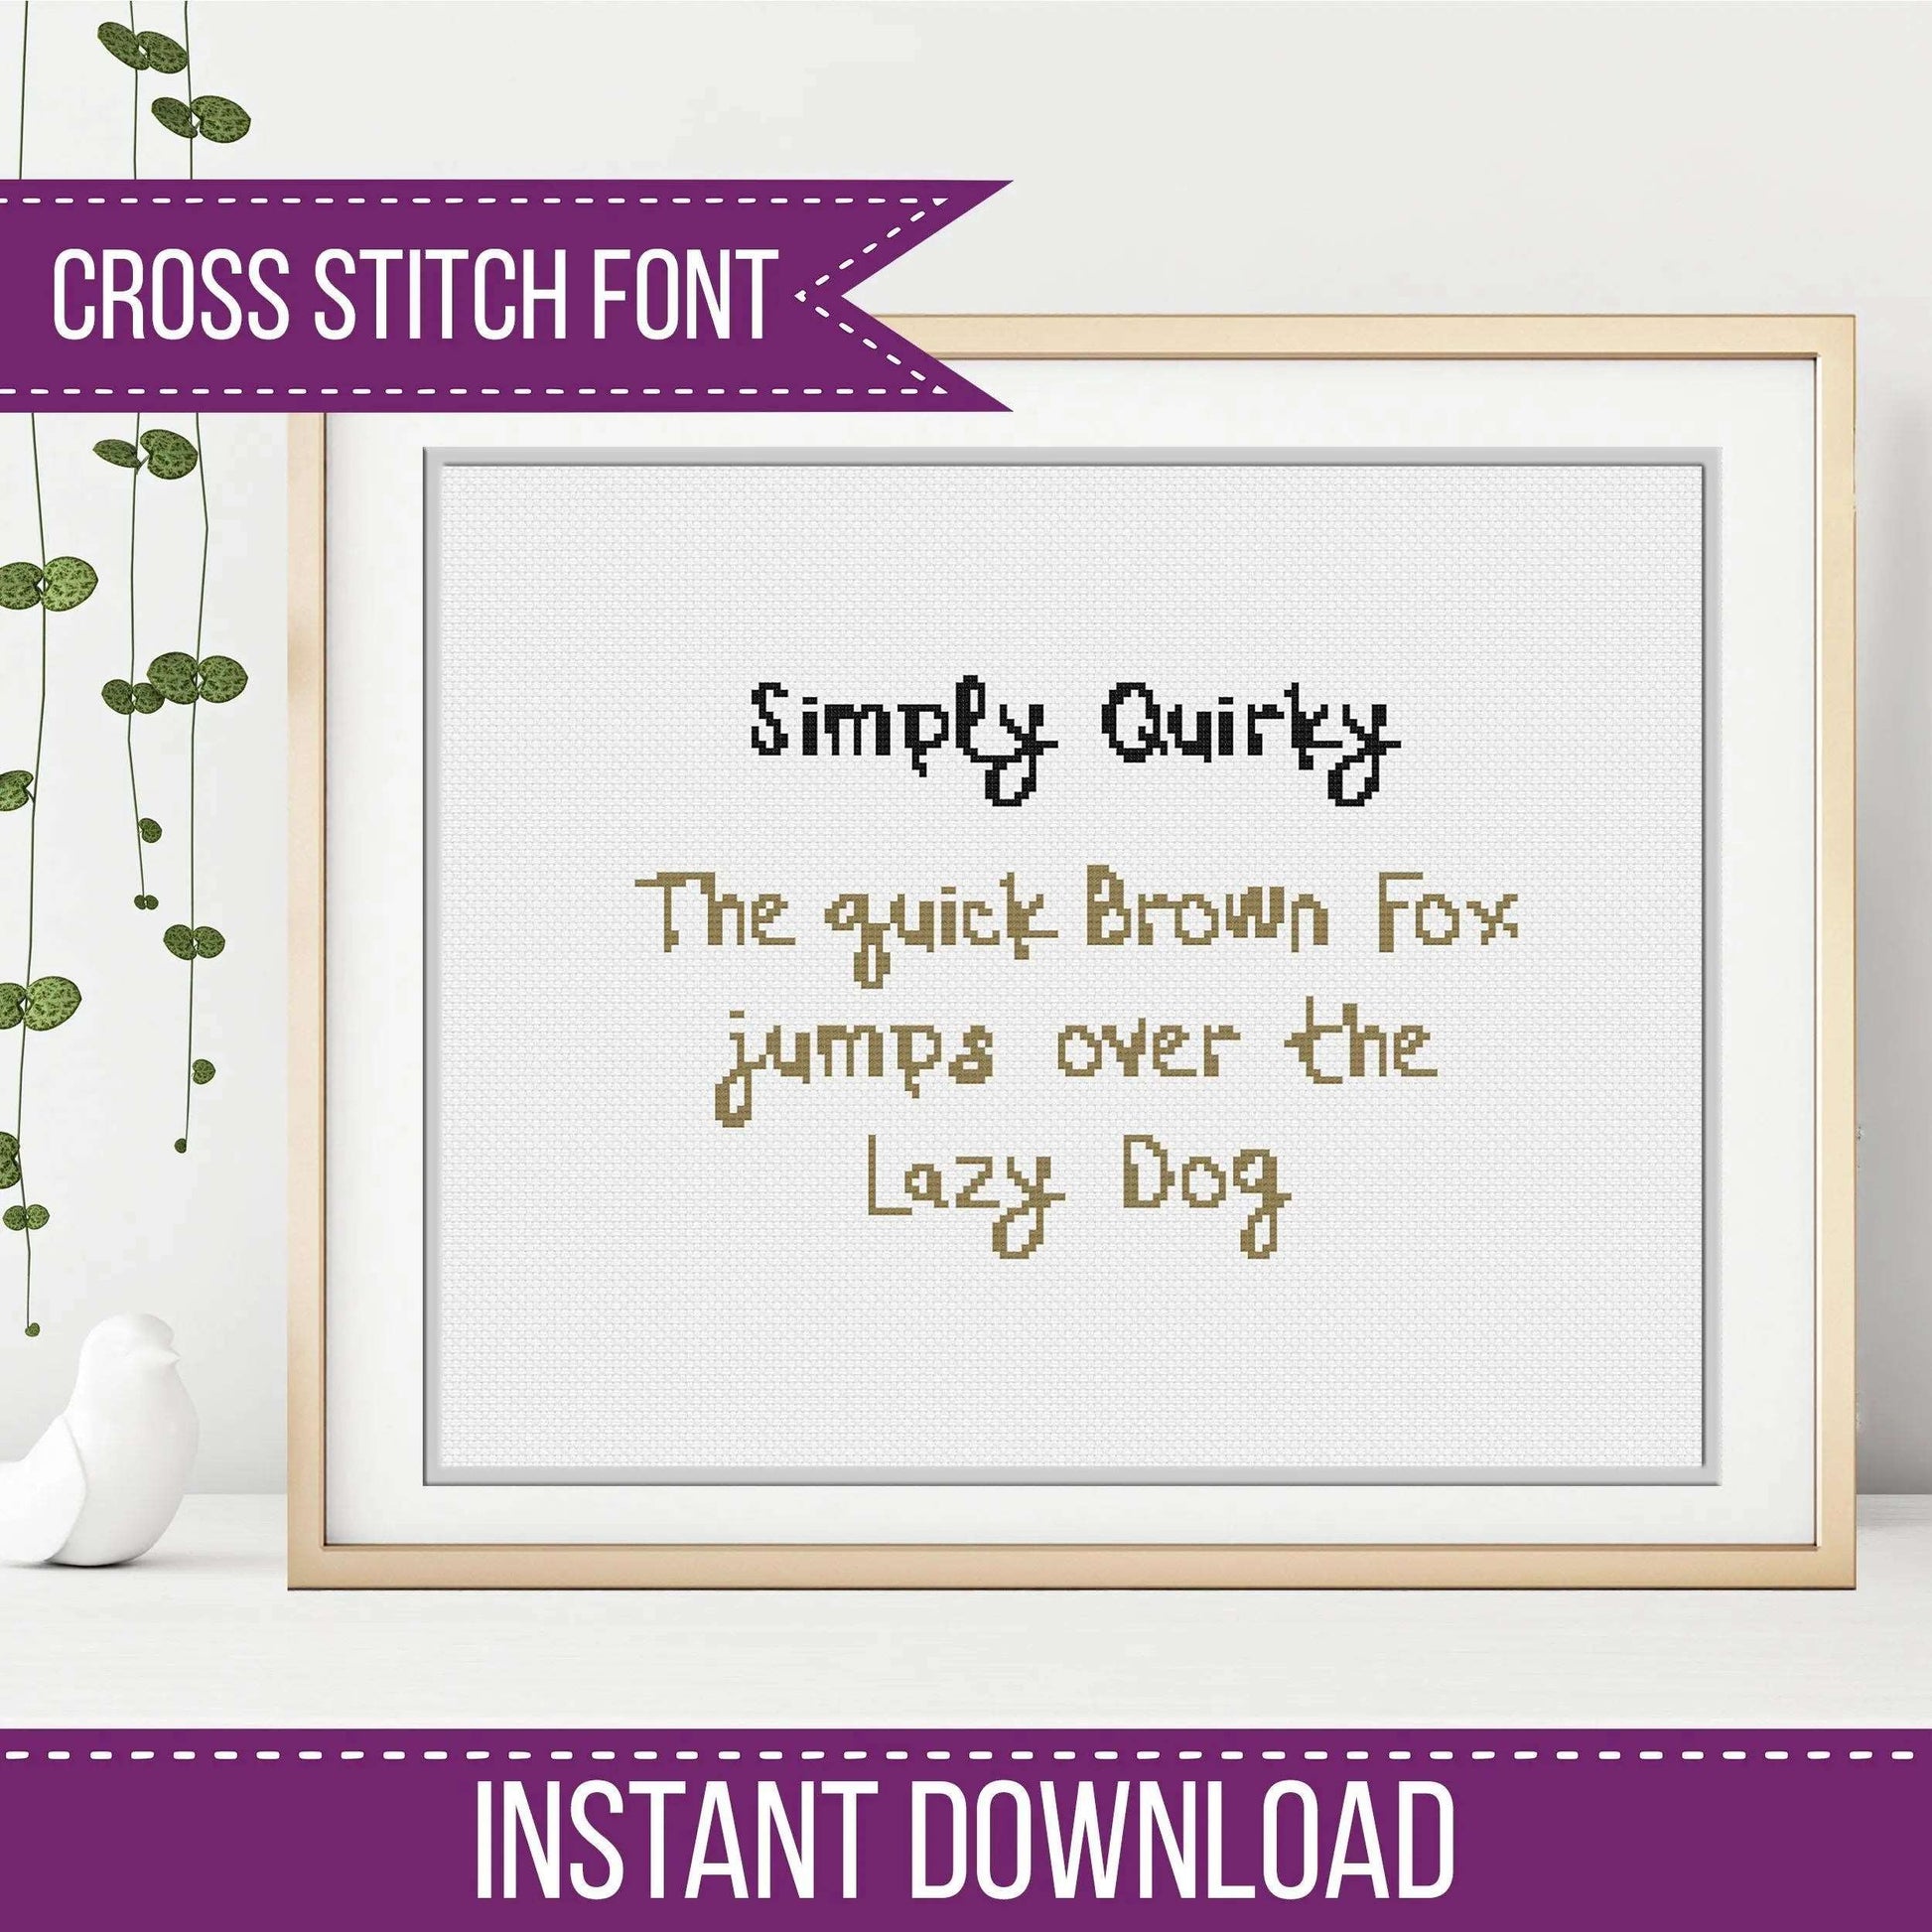 Simply Quirky Font - Blackwork Patterns & Cross Stitch by Peppermint Purple